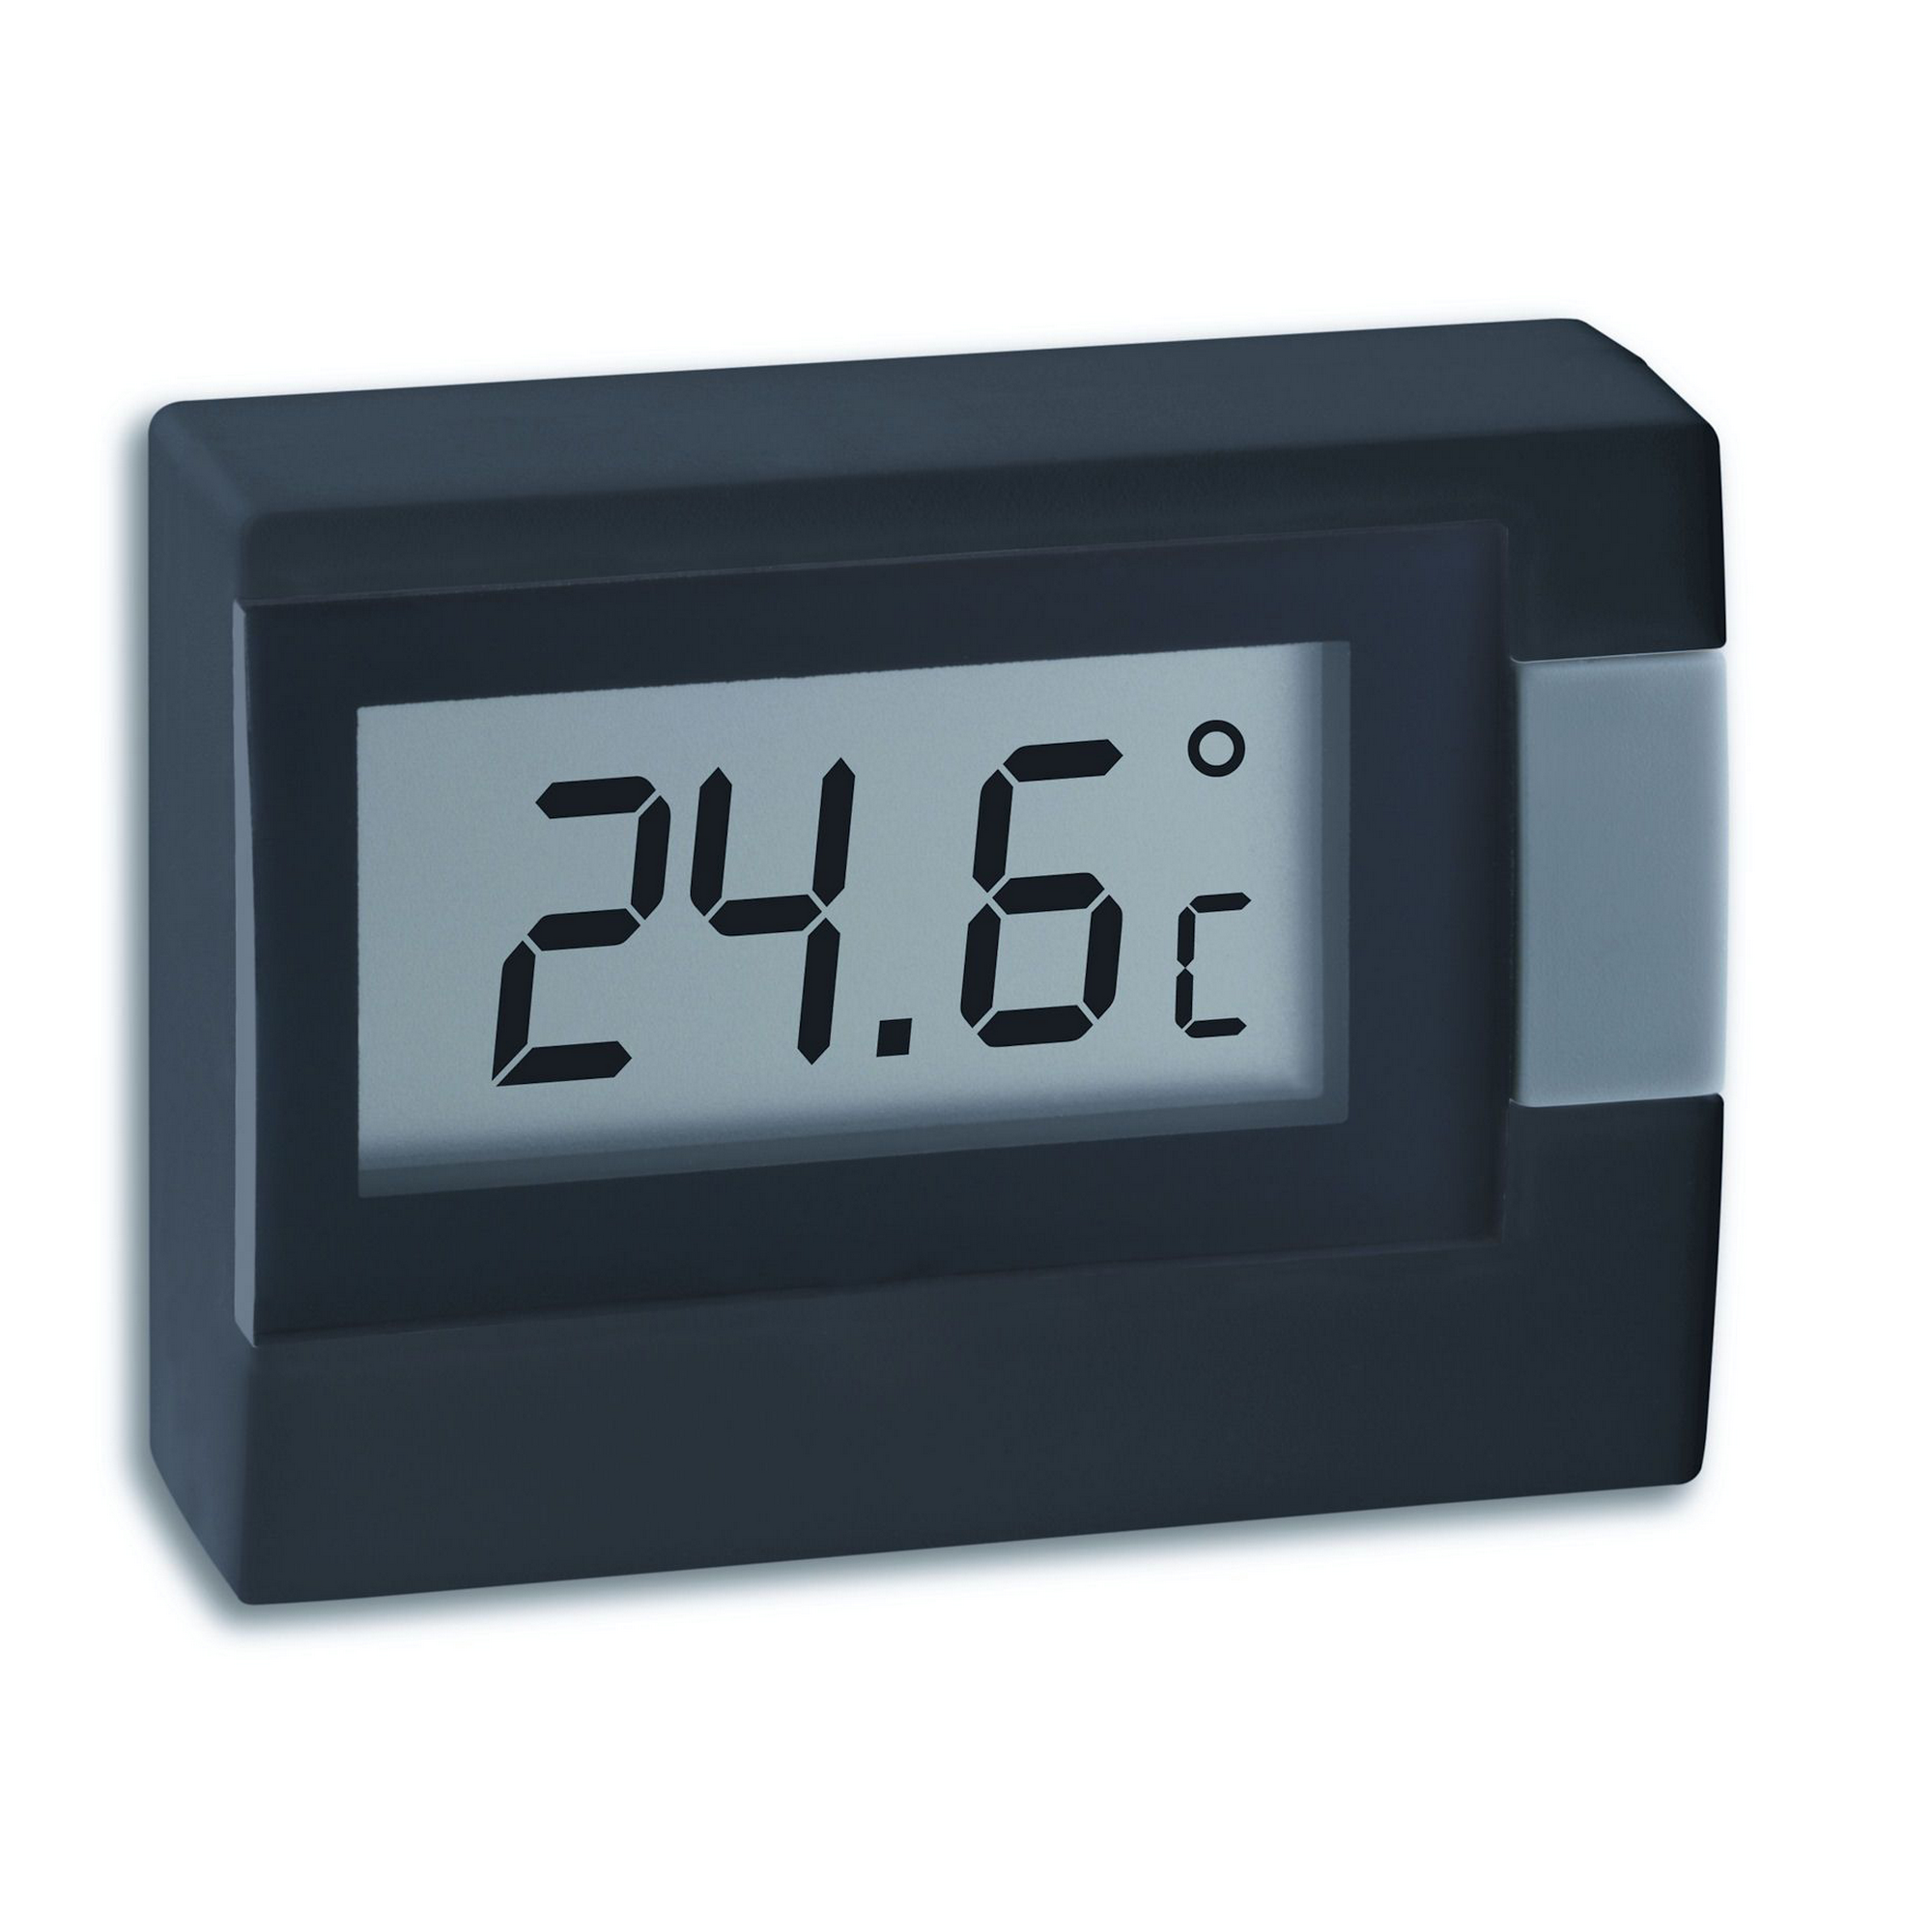 Innenthermometer Kunststoff schwarz 5,4 x 1,6 x 3,9 cm + product picture